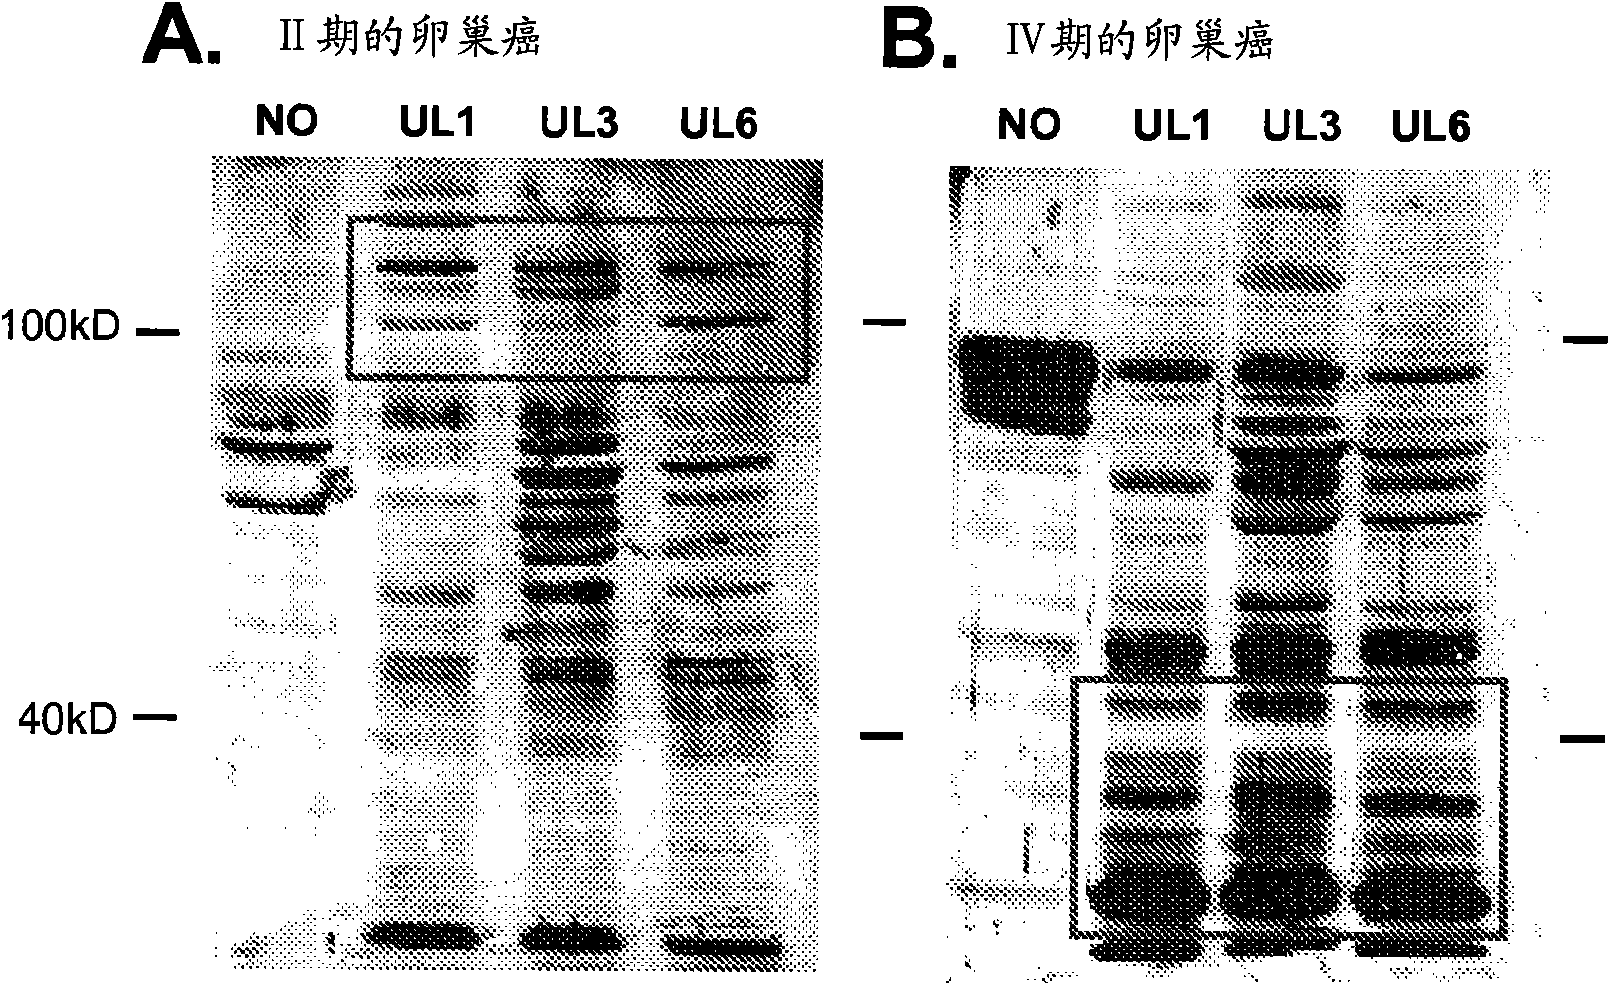 Methods of detecting autoantibodies for diagnosing and characterizing disorders